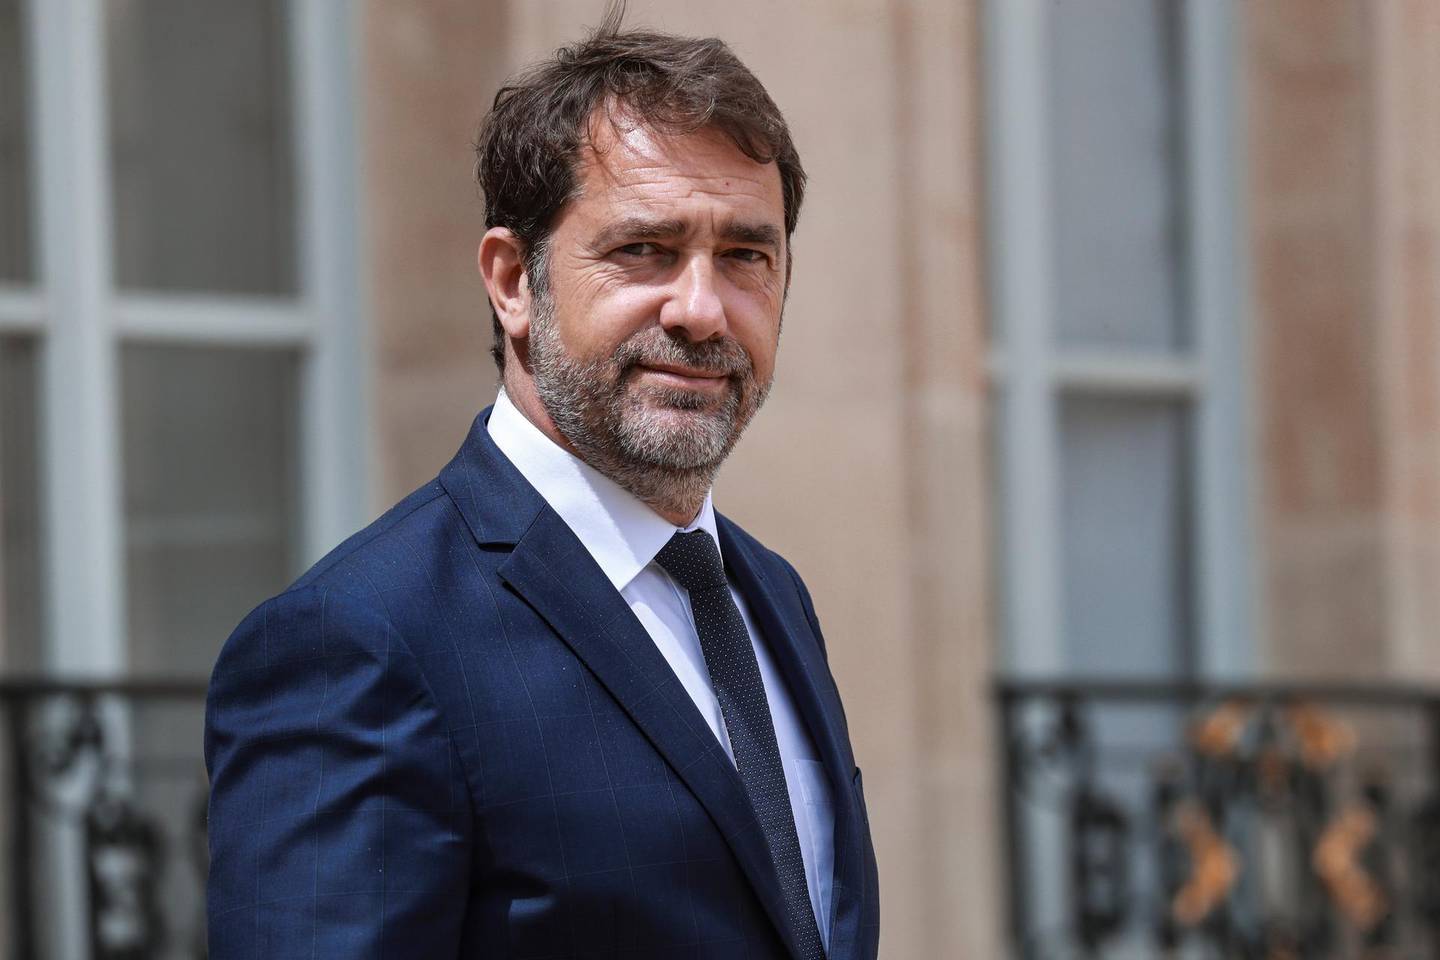 epa08477075 French Interior Minister Christophe Castaner leaves the Elysee presidential palace after attending the weekly cabinet meeting on June 10, 2020 in Paris, France.  EPA/LUDOVIC MARIN / POOL  MAXPPP OUT